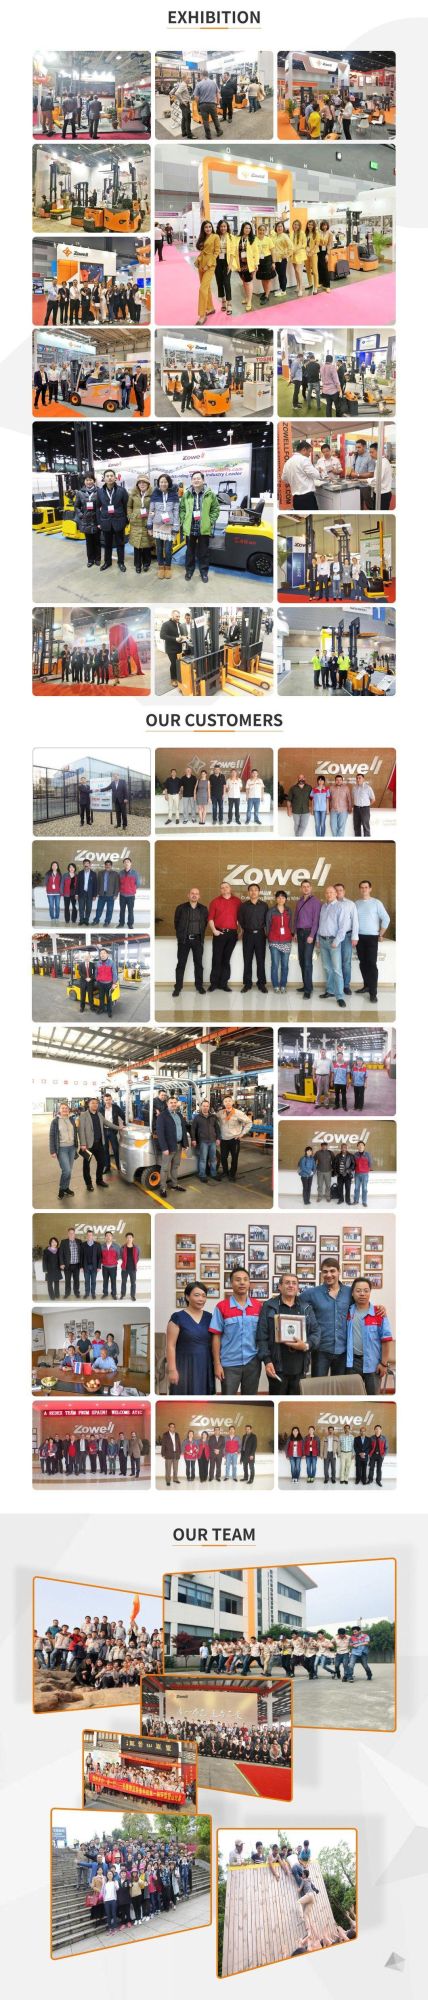 Zowell Free Spare Parts Wooden Pallet Material Handling Equipment Lift Truck